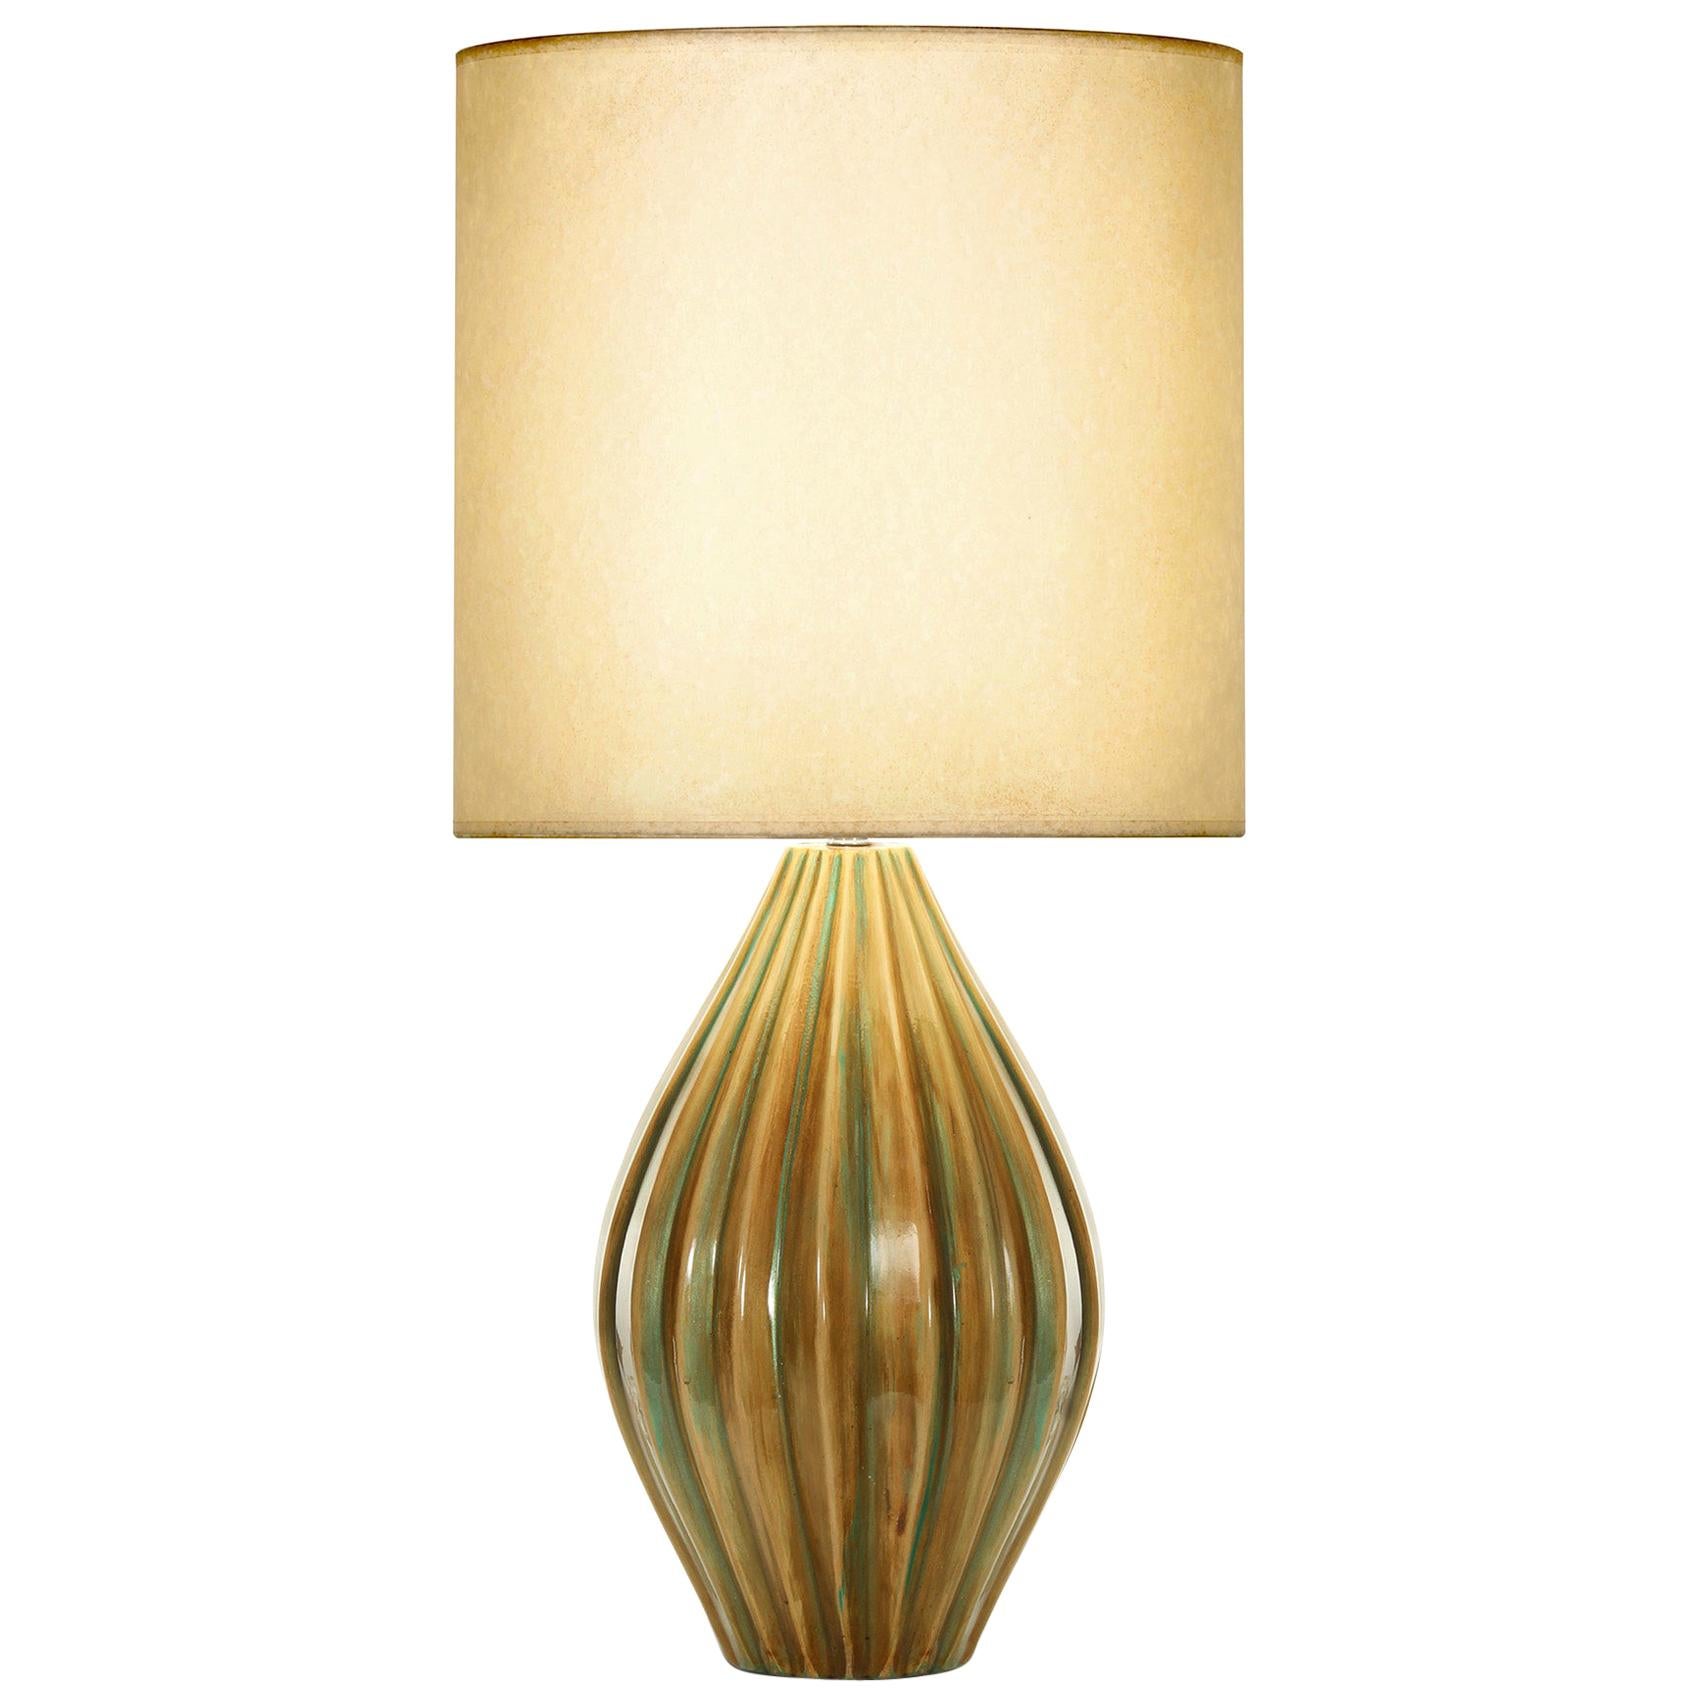 Mackenzie Table Lamp in Bronze and Green Ceramic by CuratedKravet